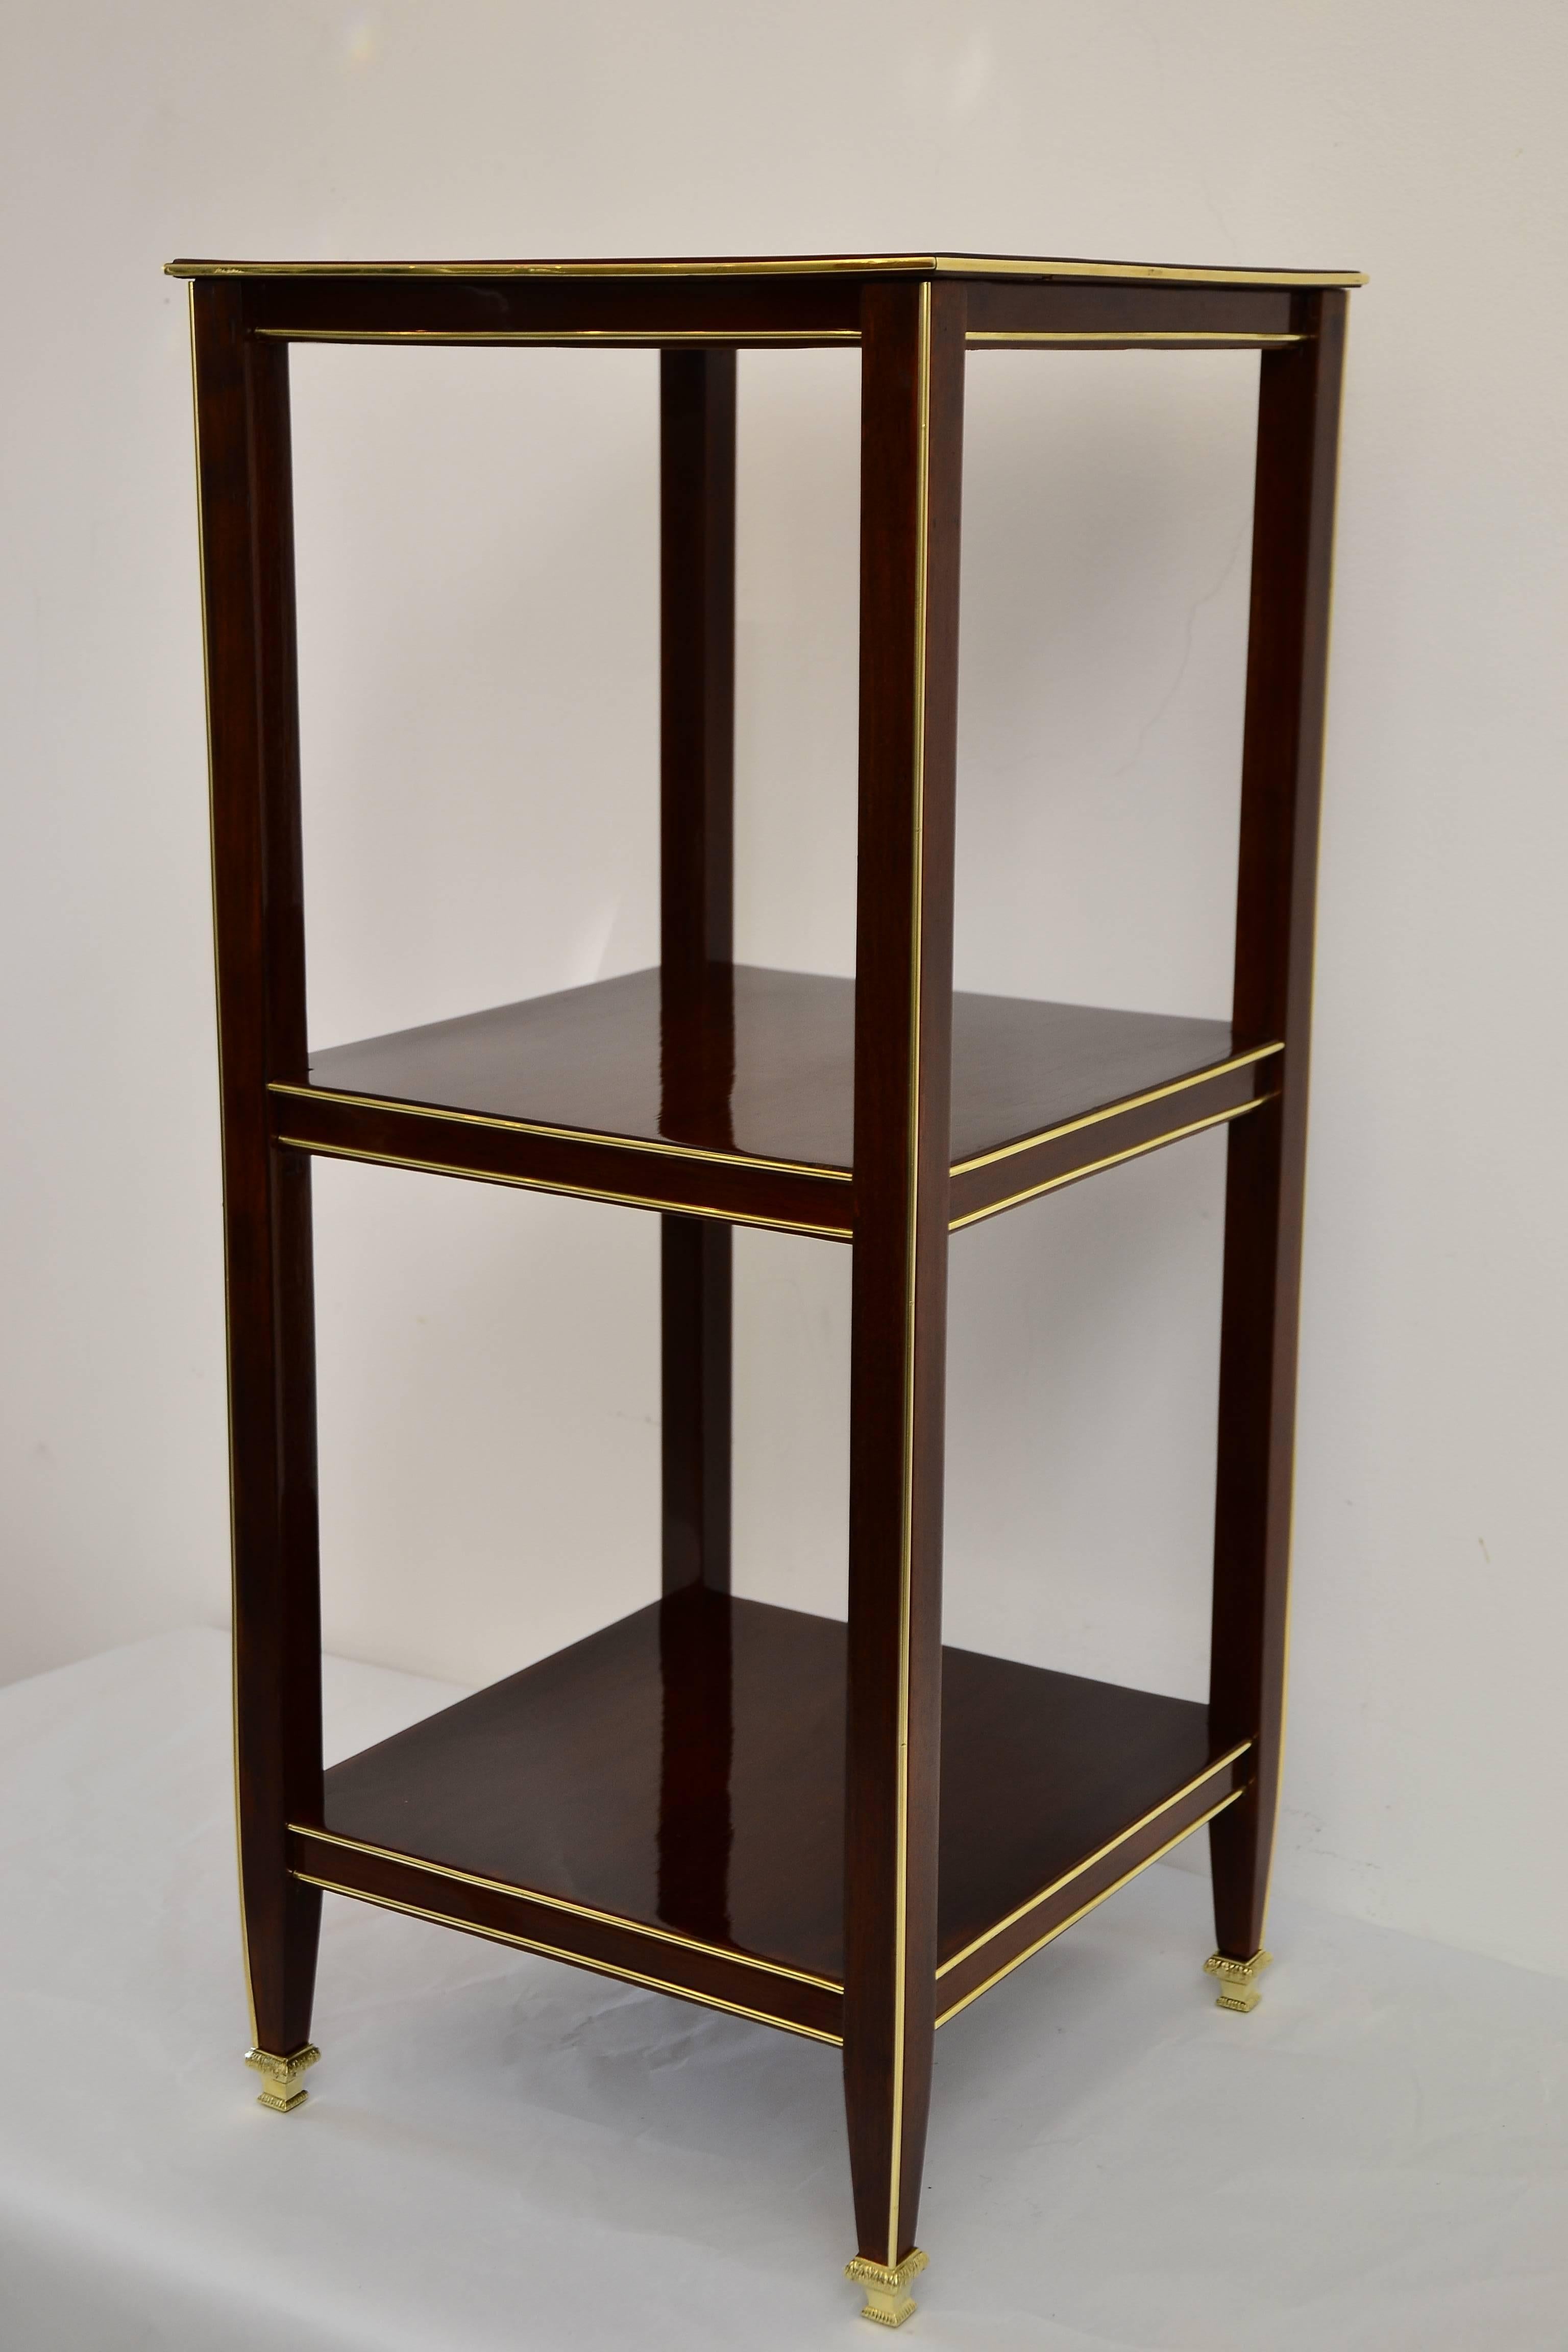 Art Deco table polished nut wood and brass inlaid, circa 1920
polished brass legs.